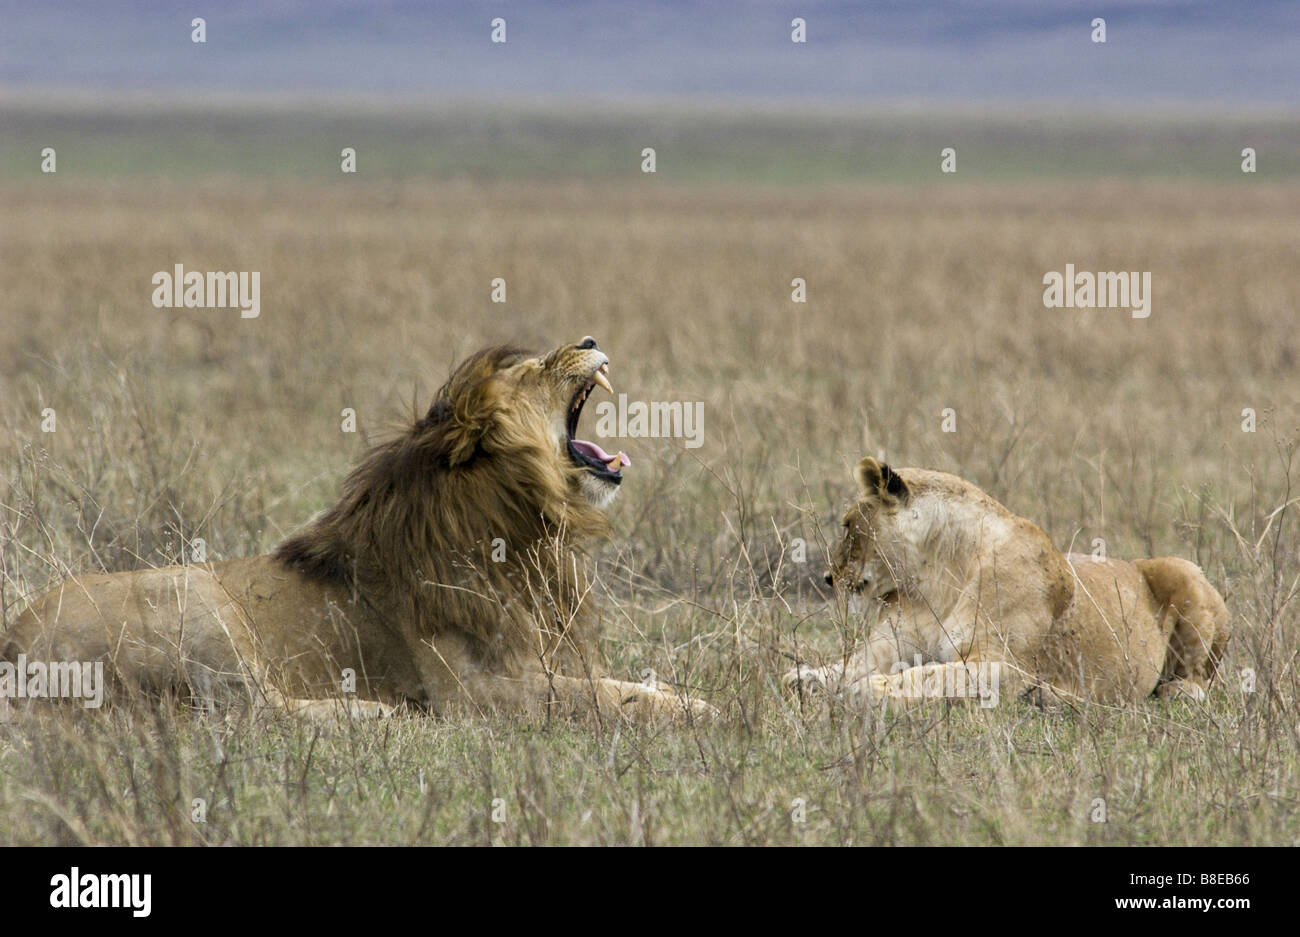 Lions fighting mateing Stock Photo